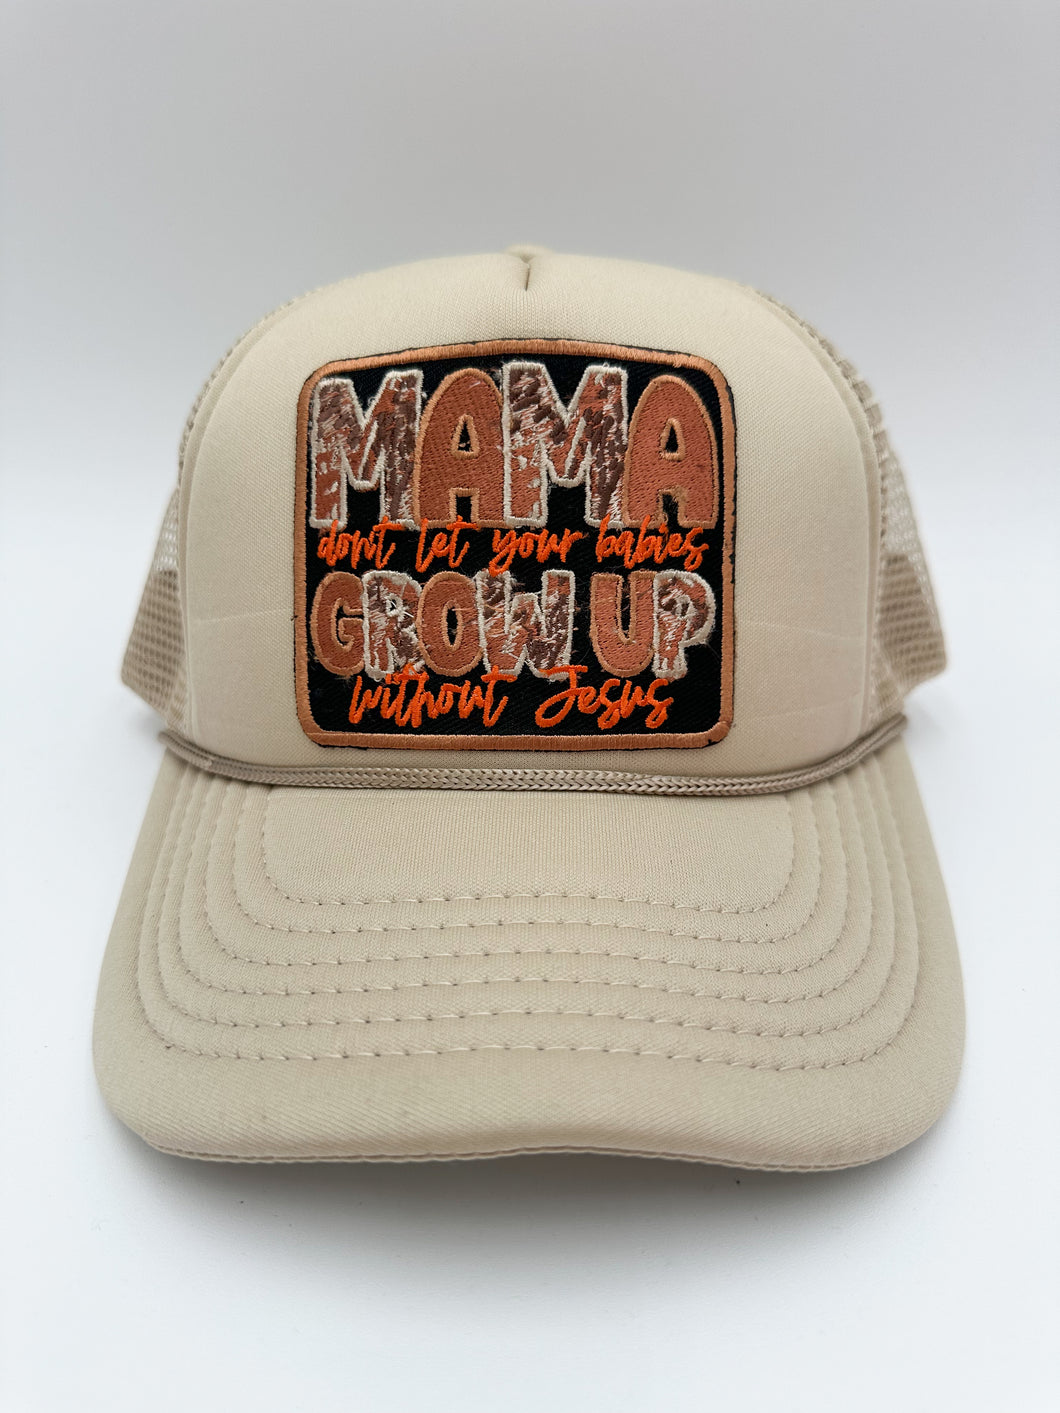 Mama don’t let your babies grow up without Jesus trucker hat